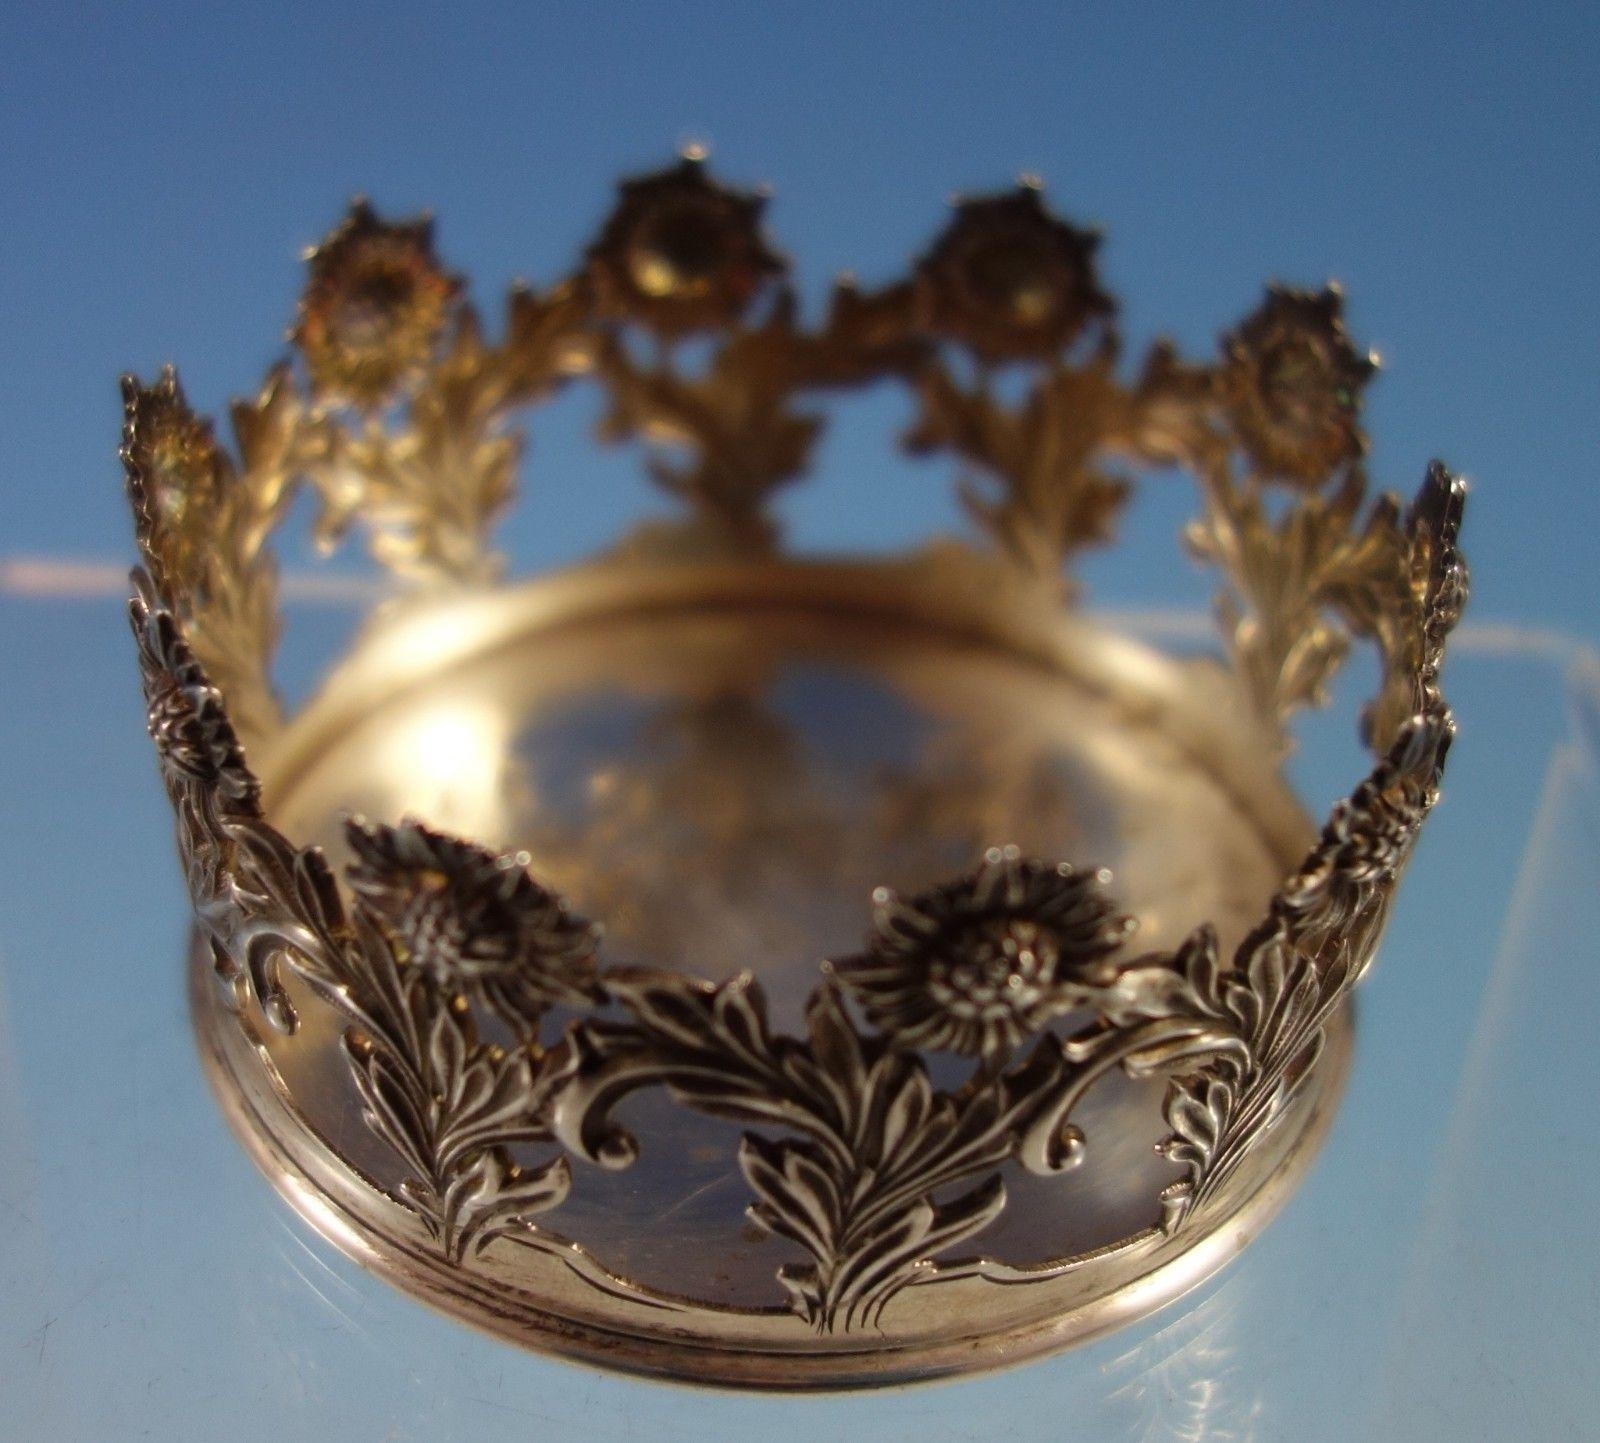 Chrysanthemum by Tiffany & Co. sterling silver base that could be used either for a vase or cup. The piece is marked with #15563/5735 and C date mark for 1902-1907. The base measures 2 7/8 in diameter, and it weighs 2.33 ozt. It is not monogrammed